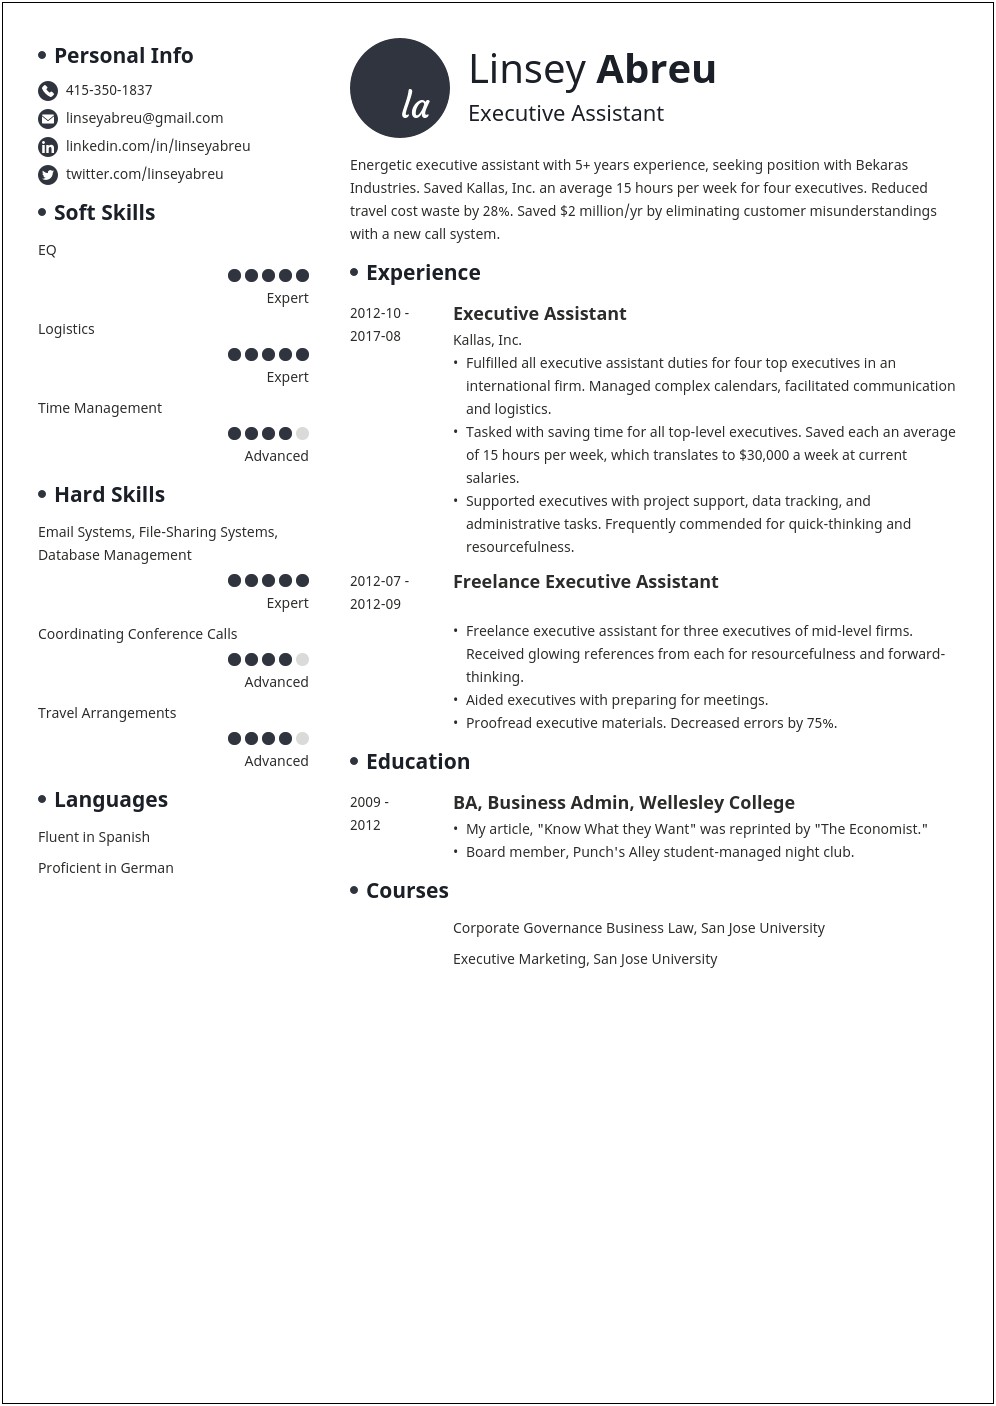 Resume Objectives For Executive Administrative Assistant